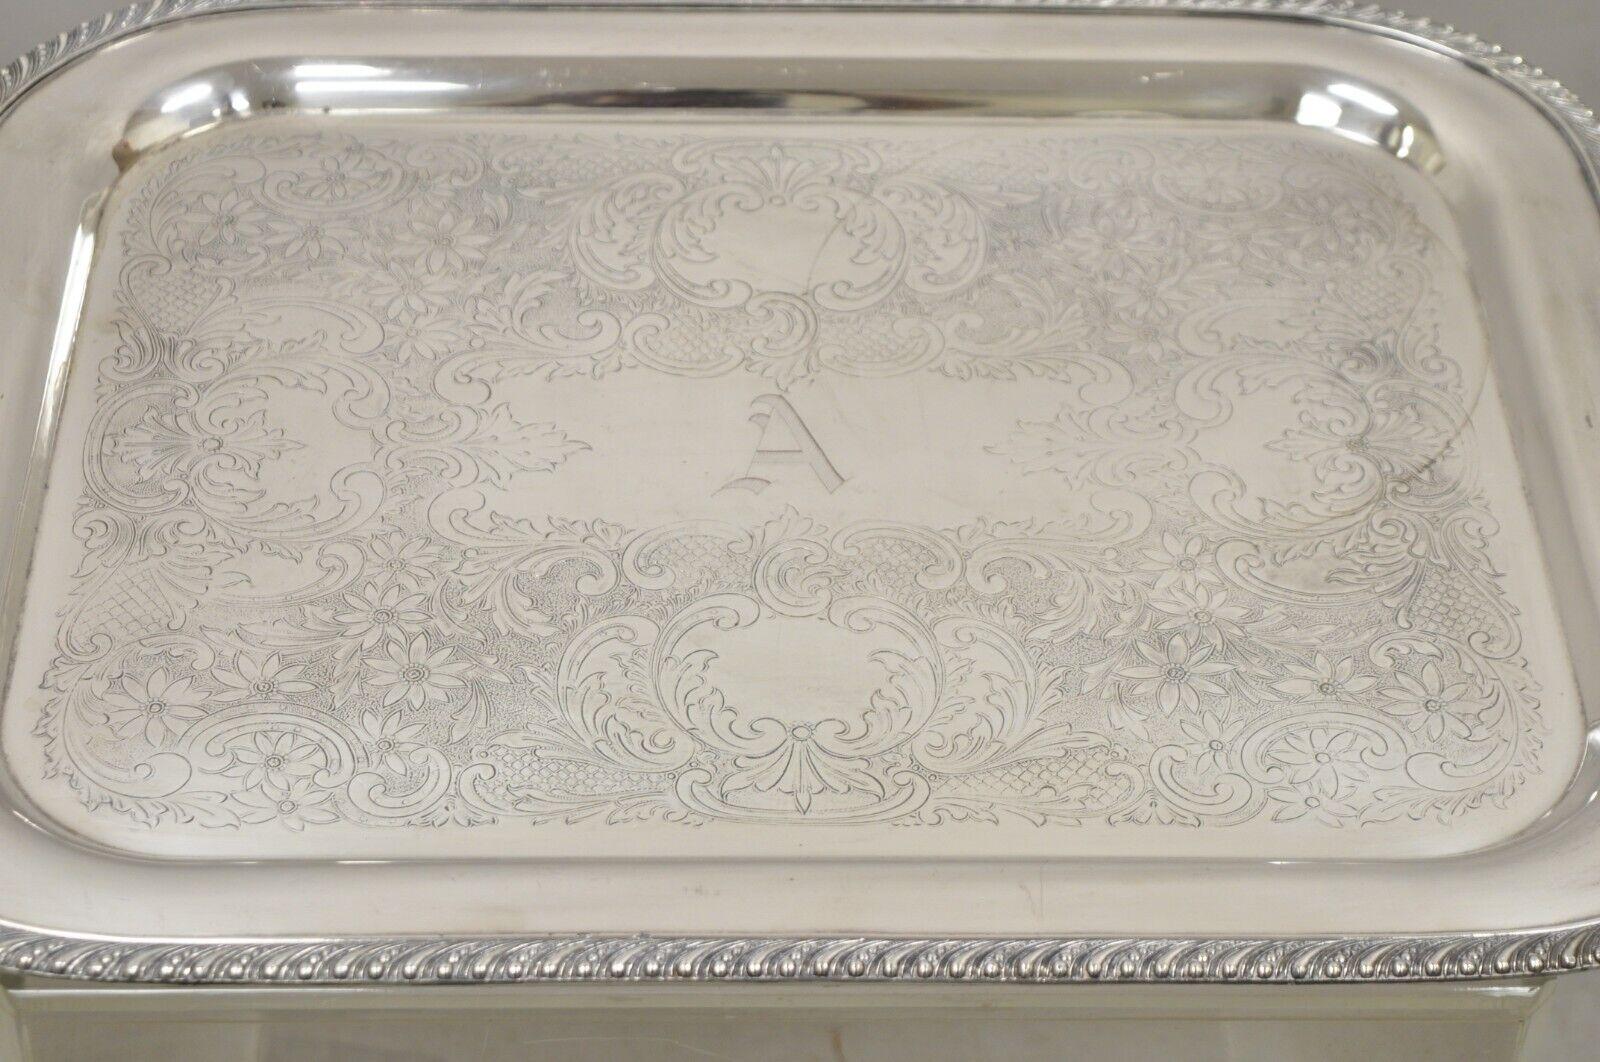 Vintage Burche Victorian Style Silver Plated Twin Handle Heavy Serving Platter Tray. Item features a heavy form, 